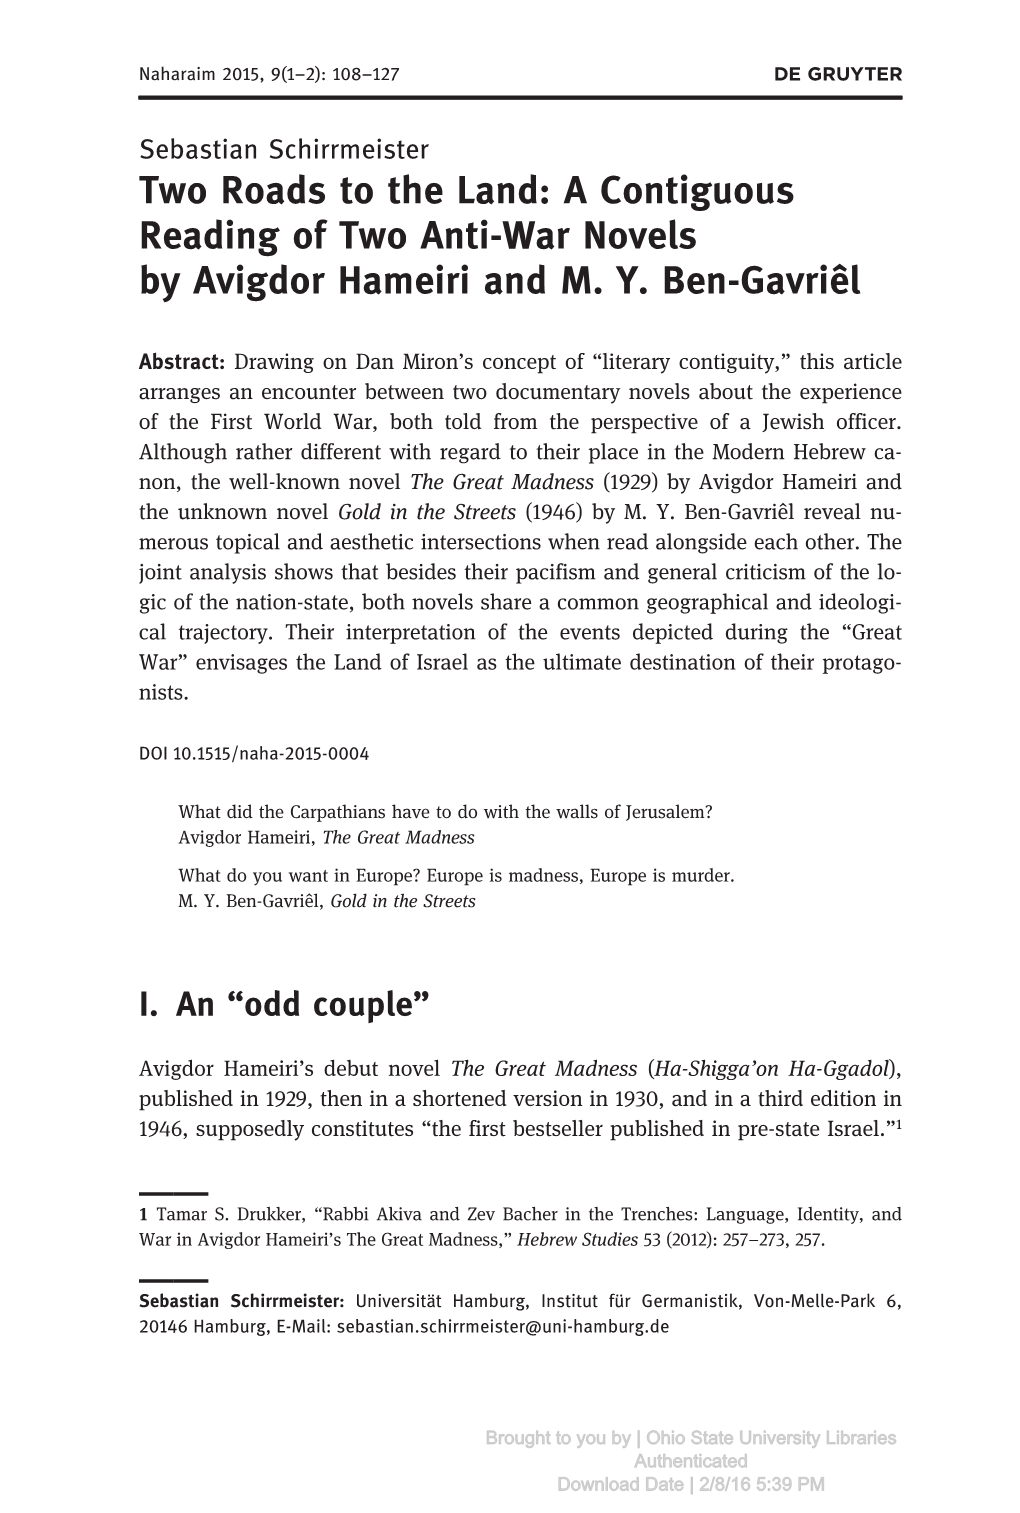 A Contiguous Reading of Two Anti-War Novels by Avigdor Hameiri and MY Ben-Gavriêl